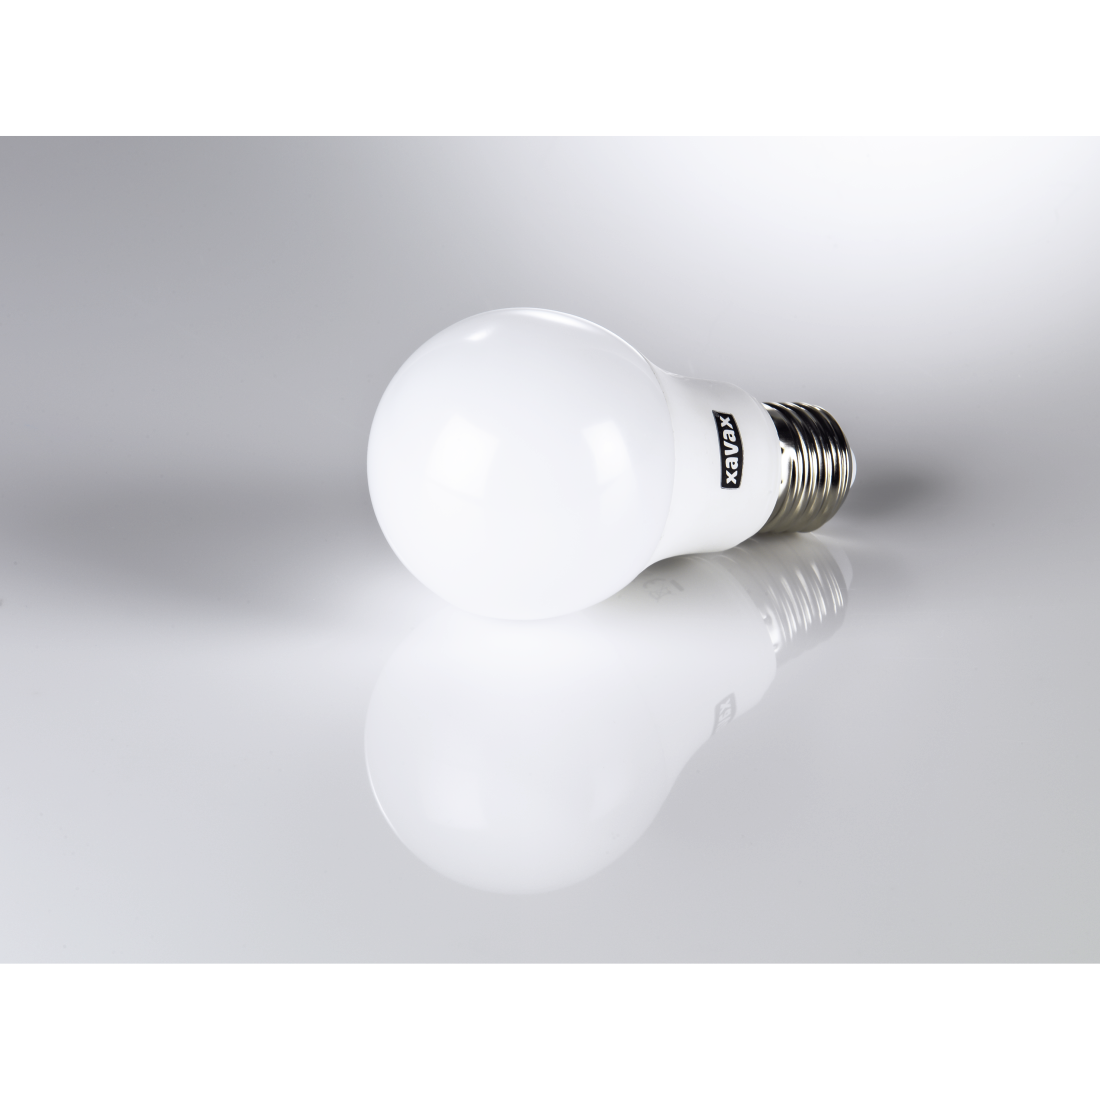 abx3 High-Res Image 3 - Xavax, LED Bulb, E27, 806lm replaces 60W, incandescent bulb, warm, dimmable